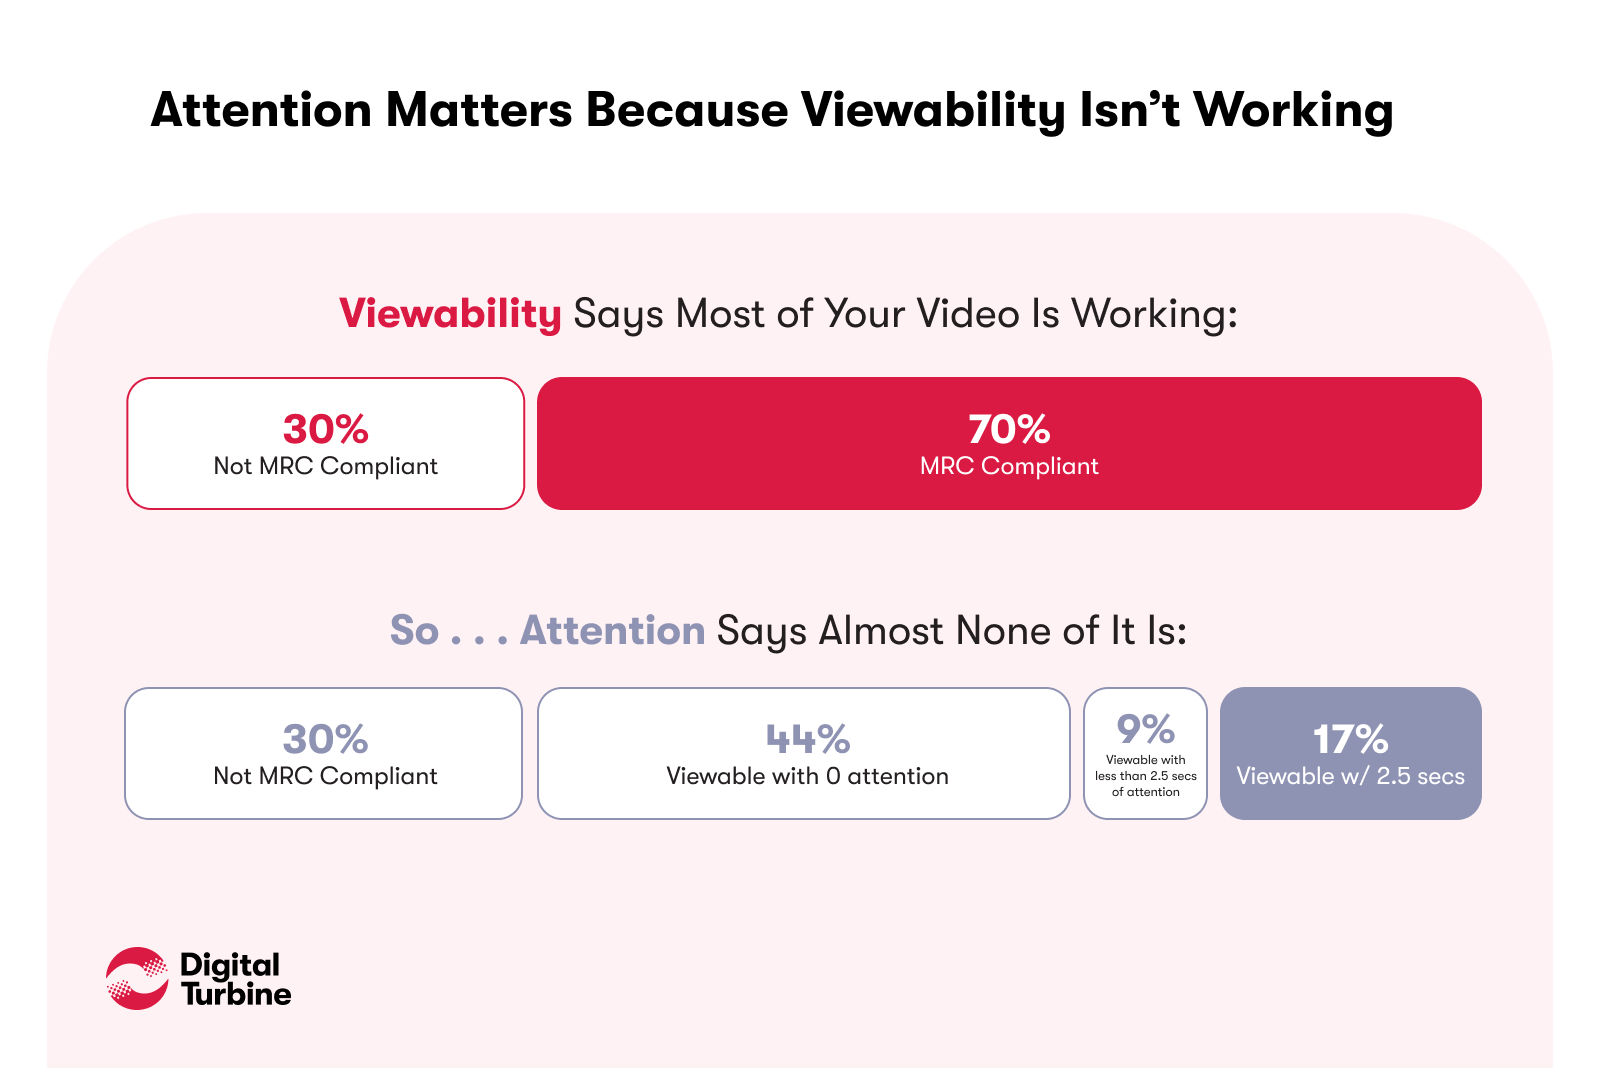 Attention matters because viewability isn't working